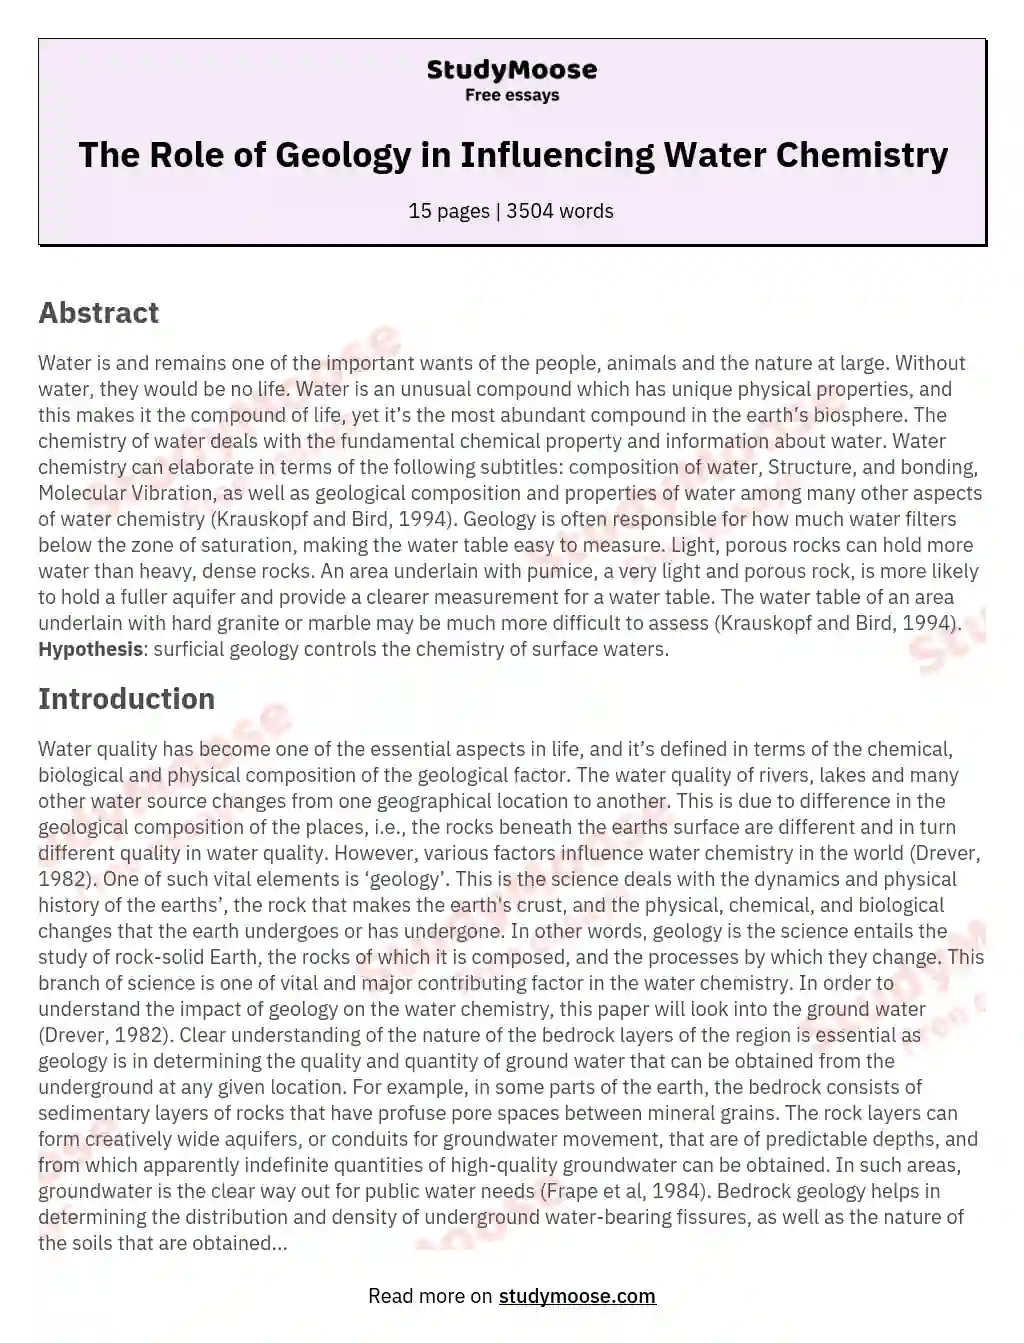 The Role of Geology in Influencing Water Chemistry essay